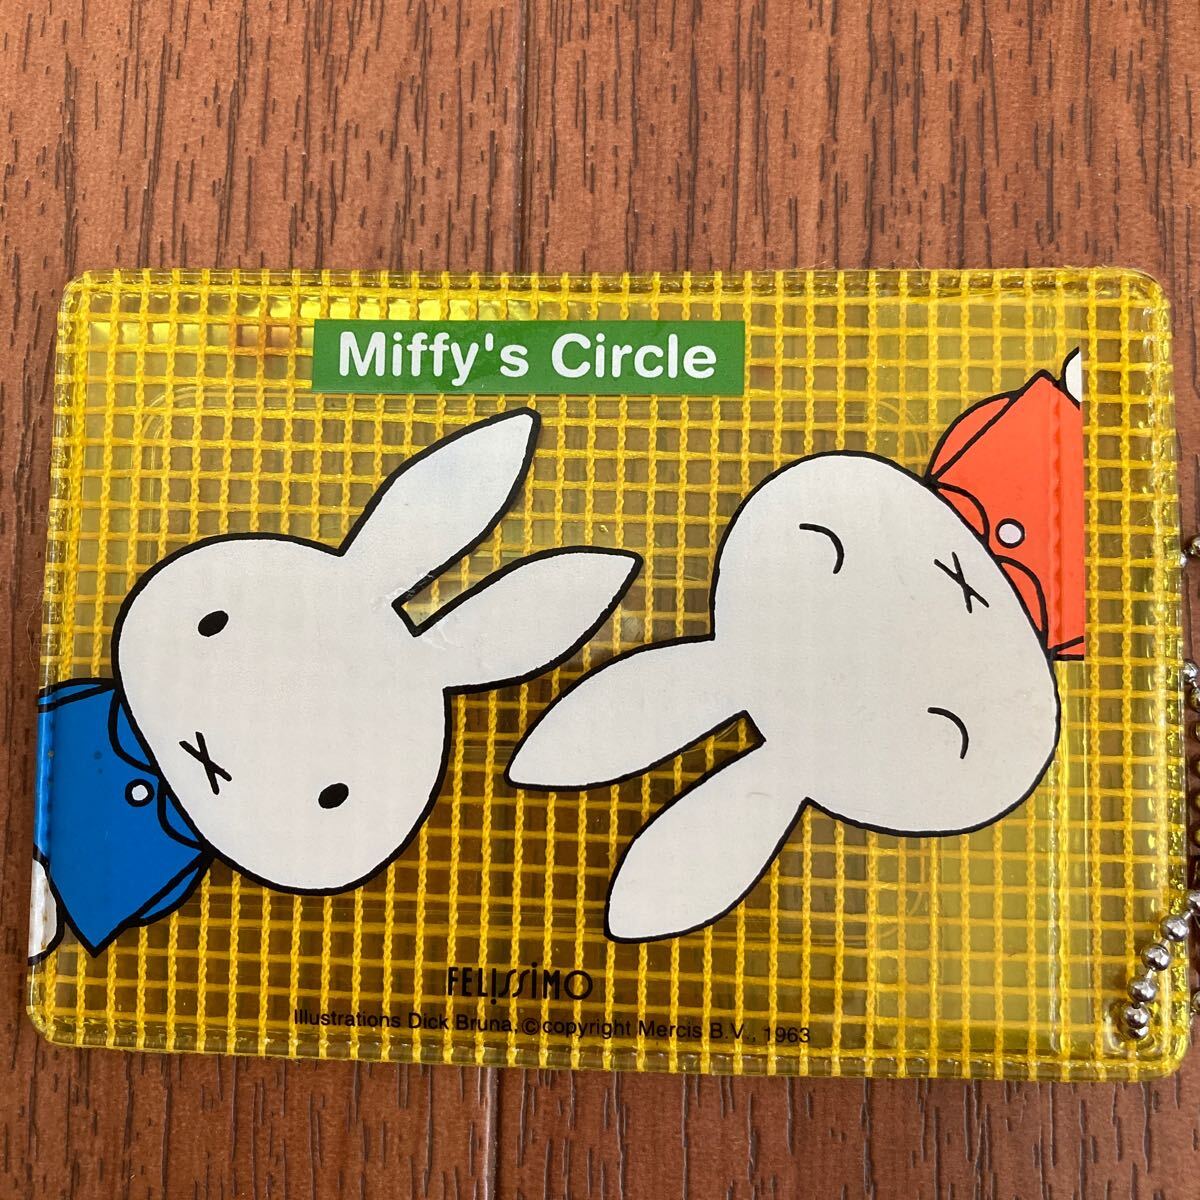  Ferrie simo Miffy Circle card-case & member z card Dick bruna pass case fixed period ticket inserting Myffy